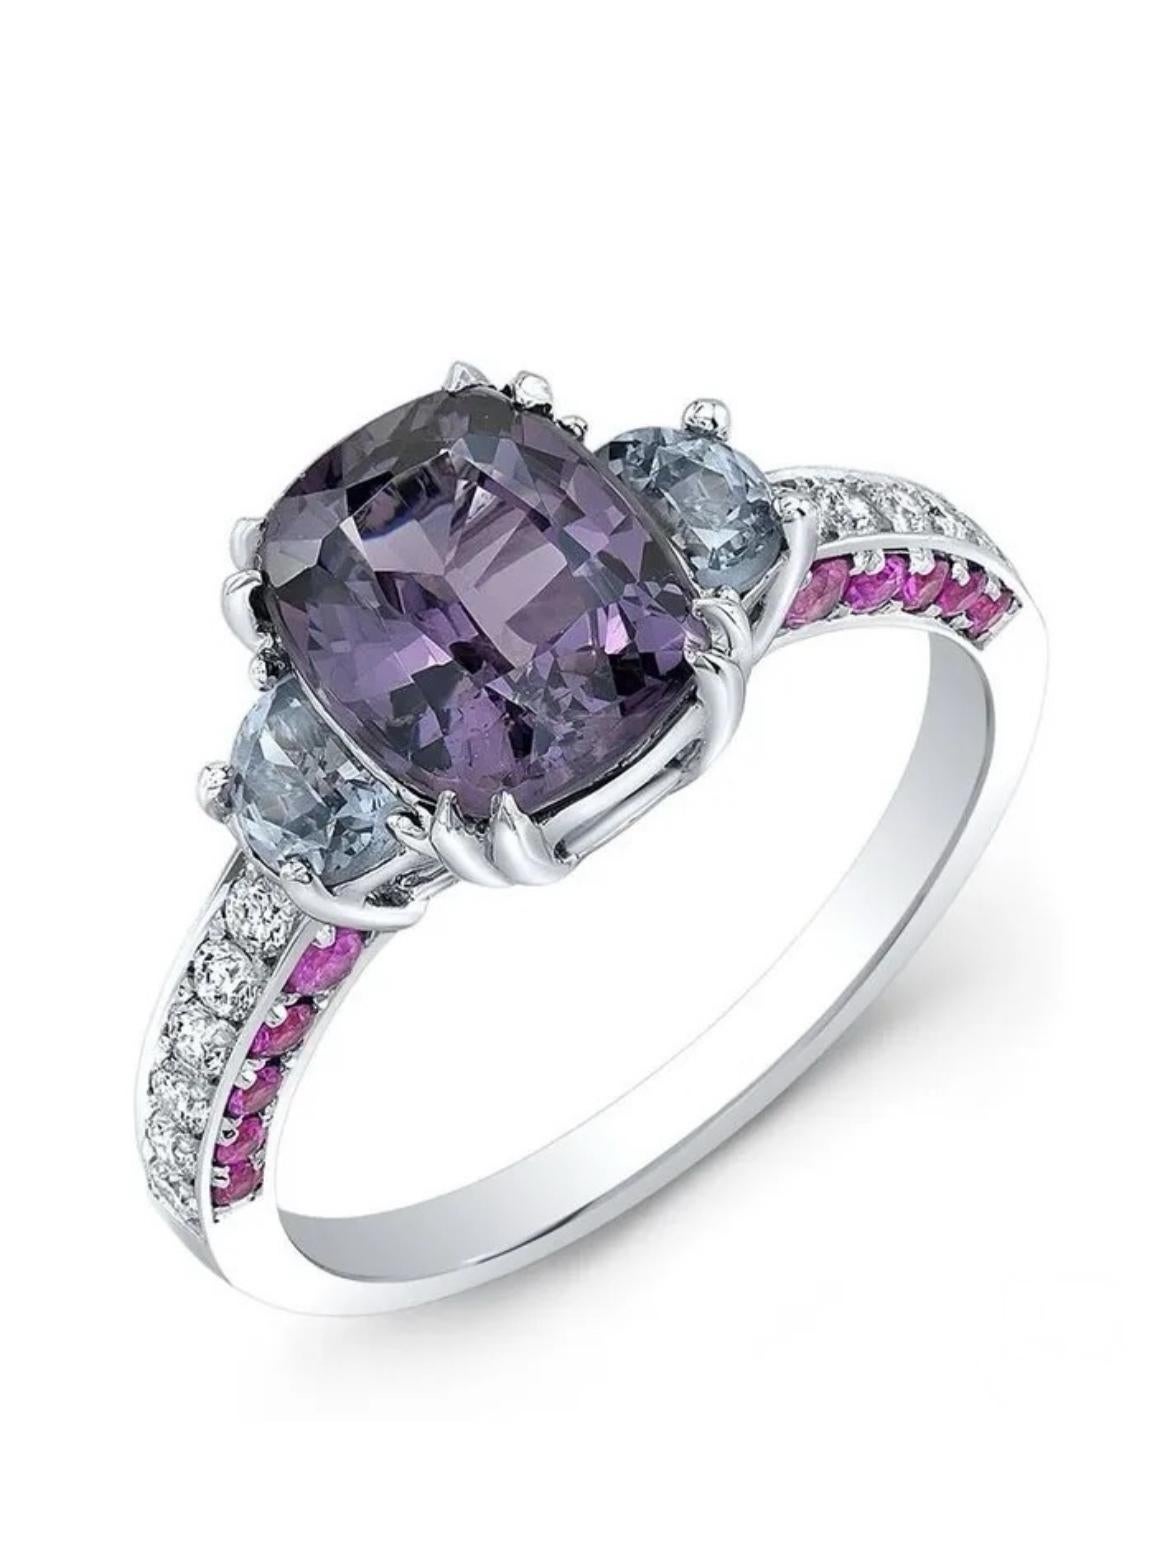 18K white gold ring, featuring an untreated 2.21 carat Purple Spinel, complemented by two untreated half-moon cut Violet Spinels totaling 0.62 carats. These gorgeous gems are surrounded by 20 Ceylon Pink Sapphires totaling 0.52 carats and numerous